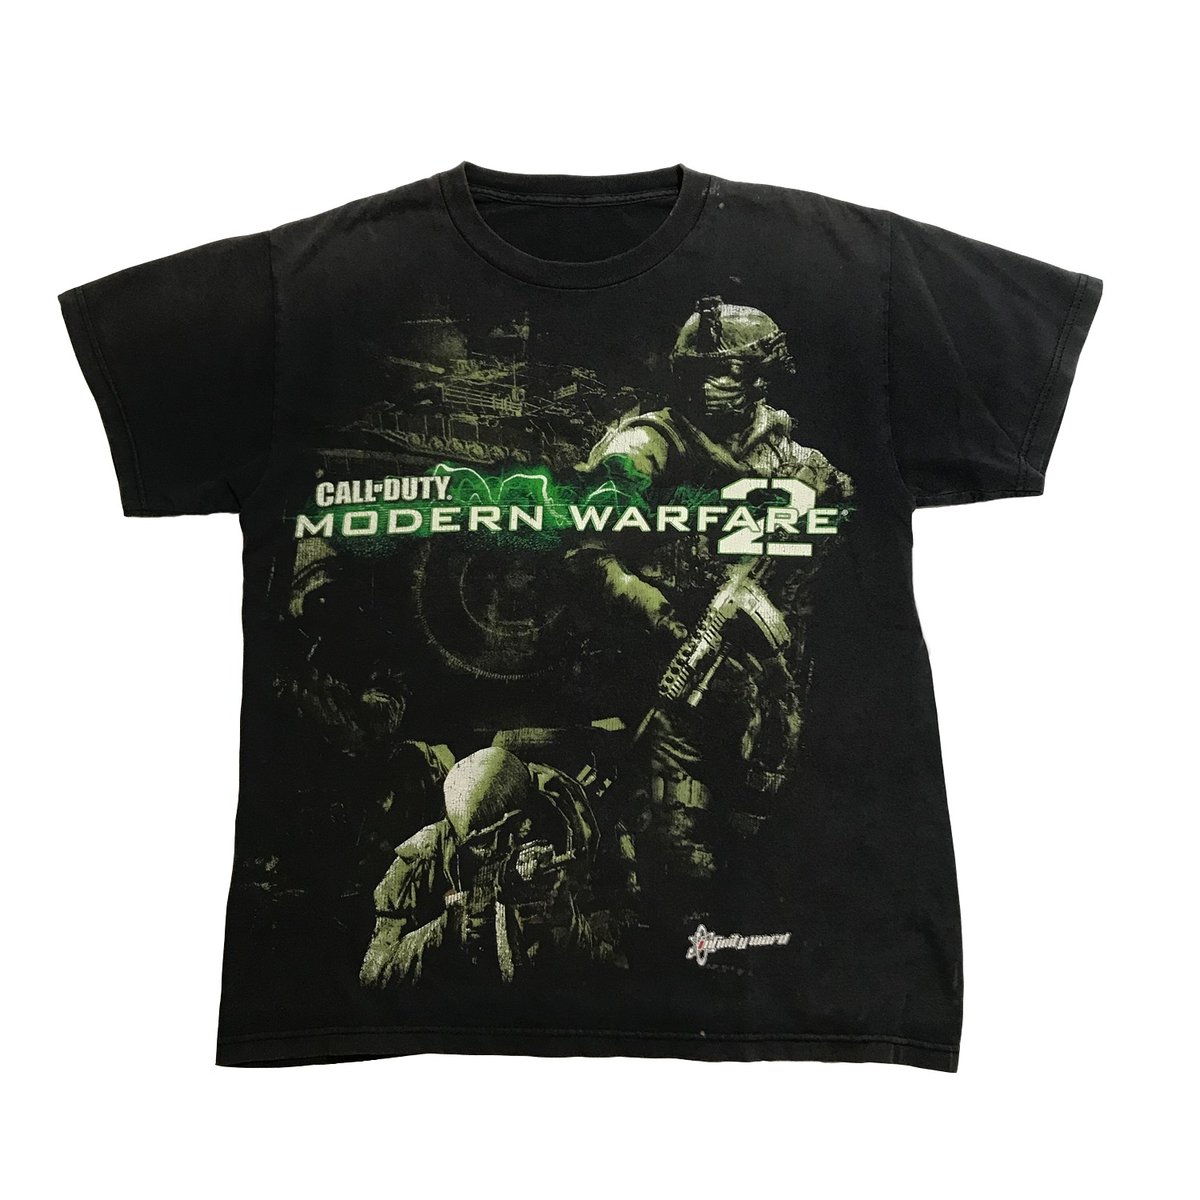 00's Call of duty MW2 Shirt | coolloots